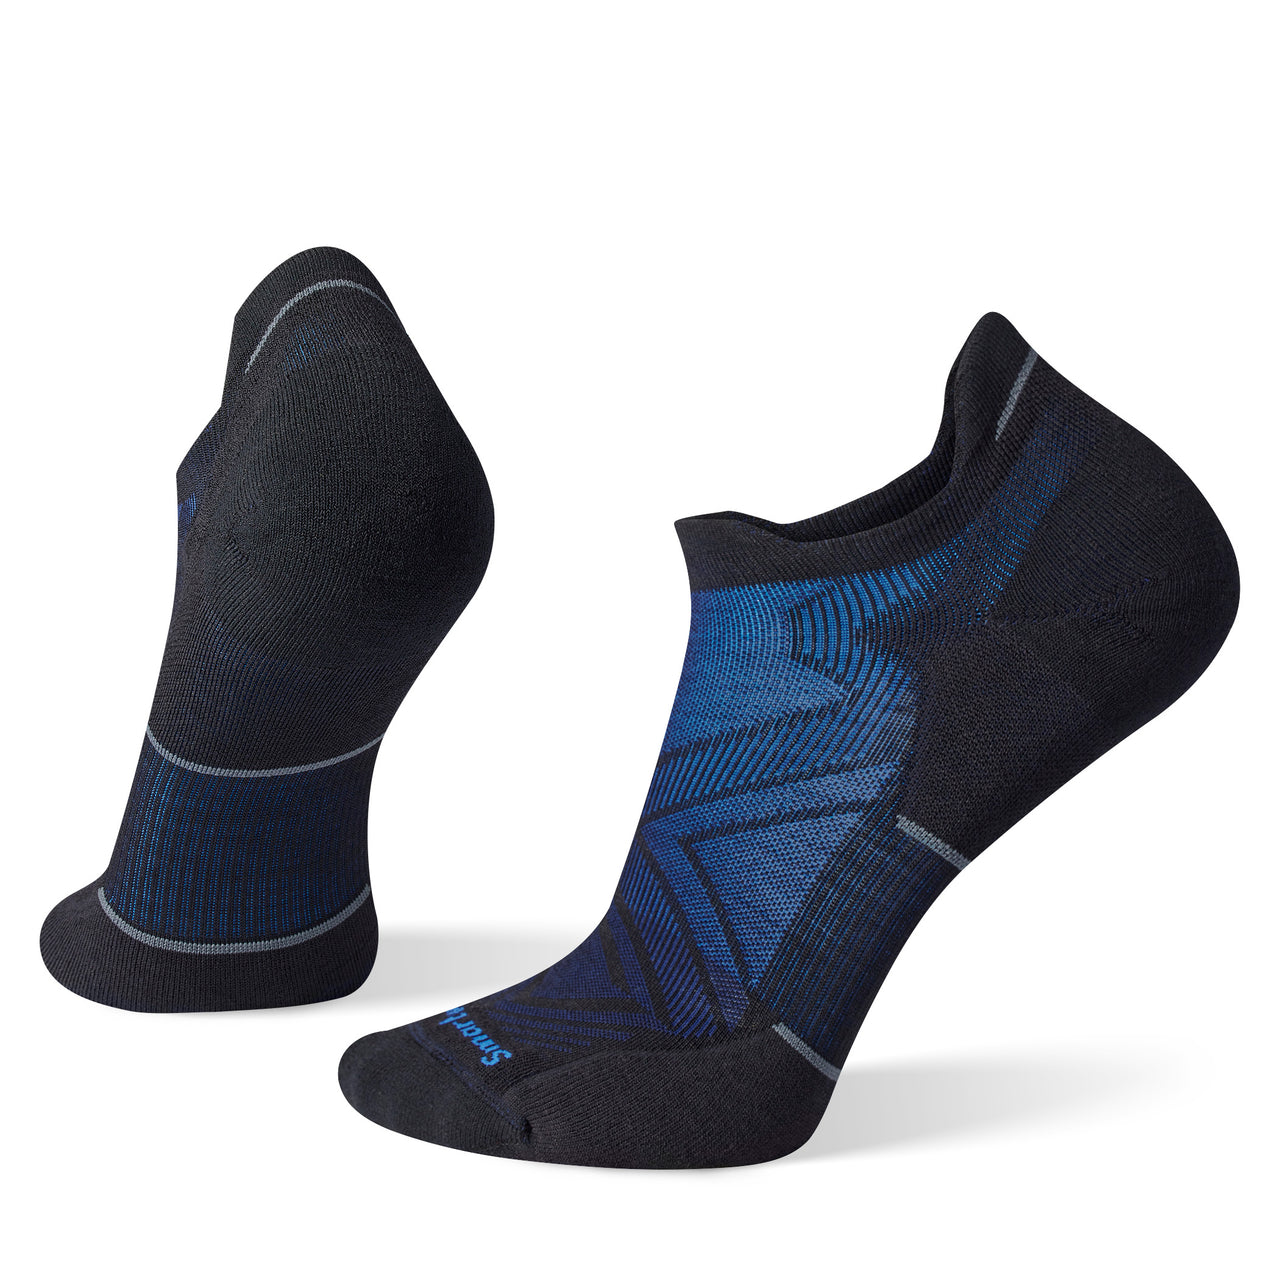 Men's Run Targeted Cushion Low Ankle Socks SW001659